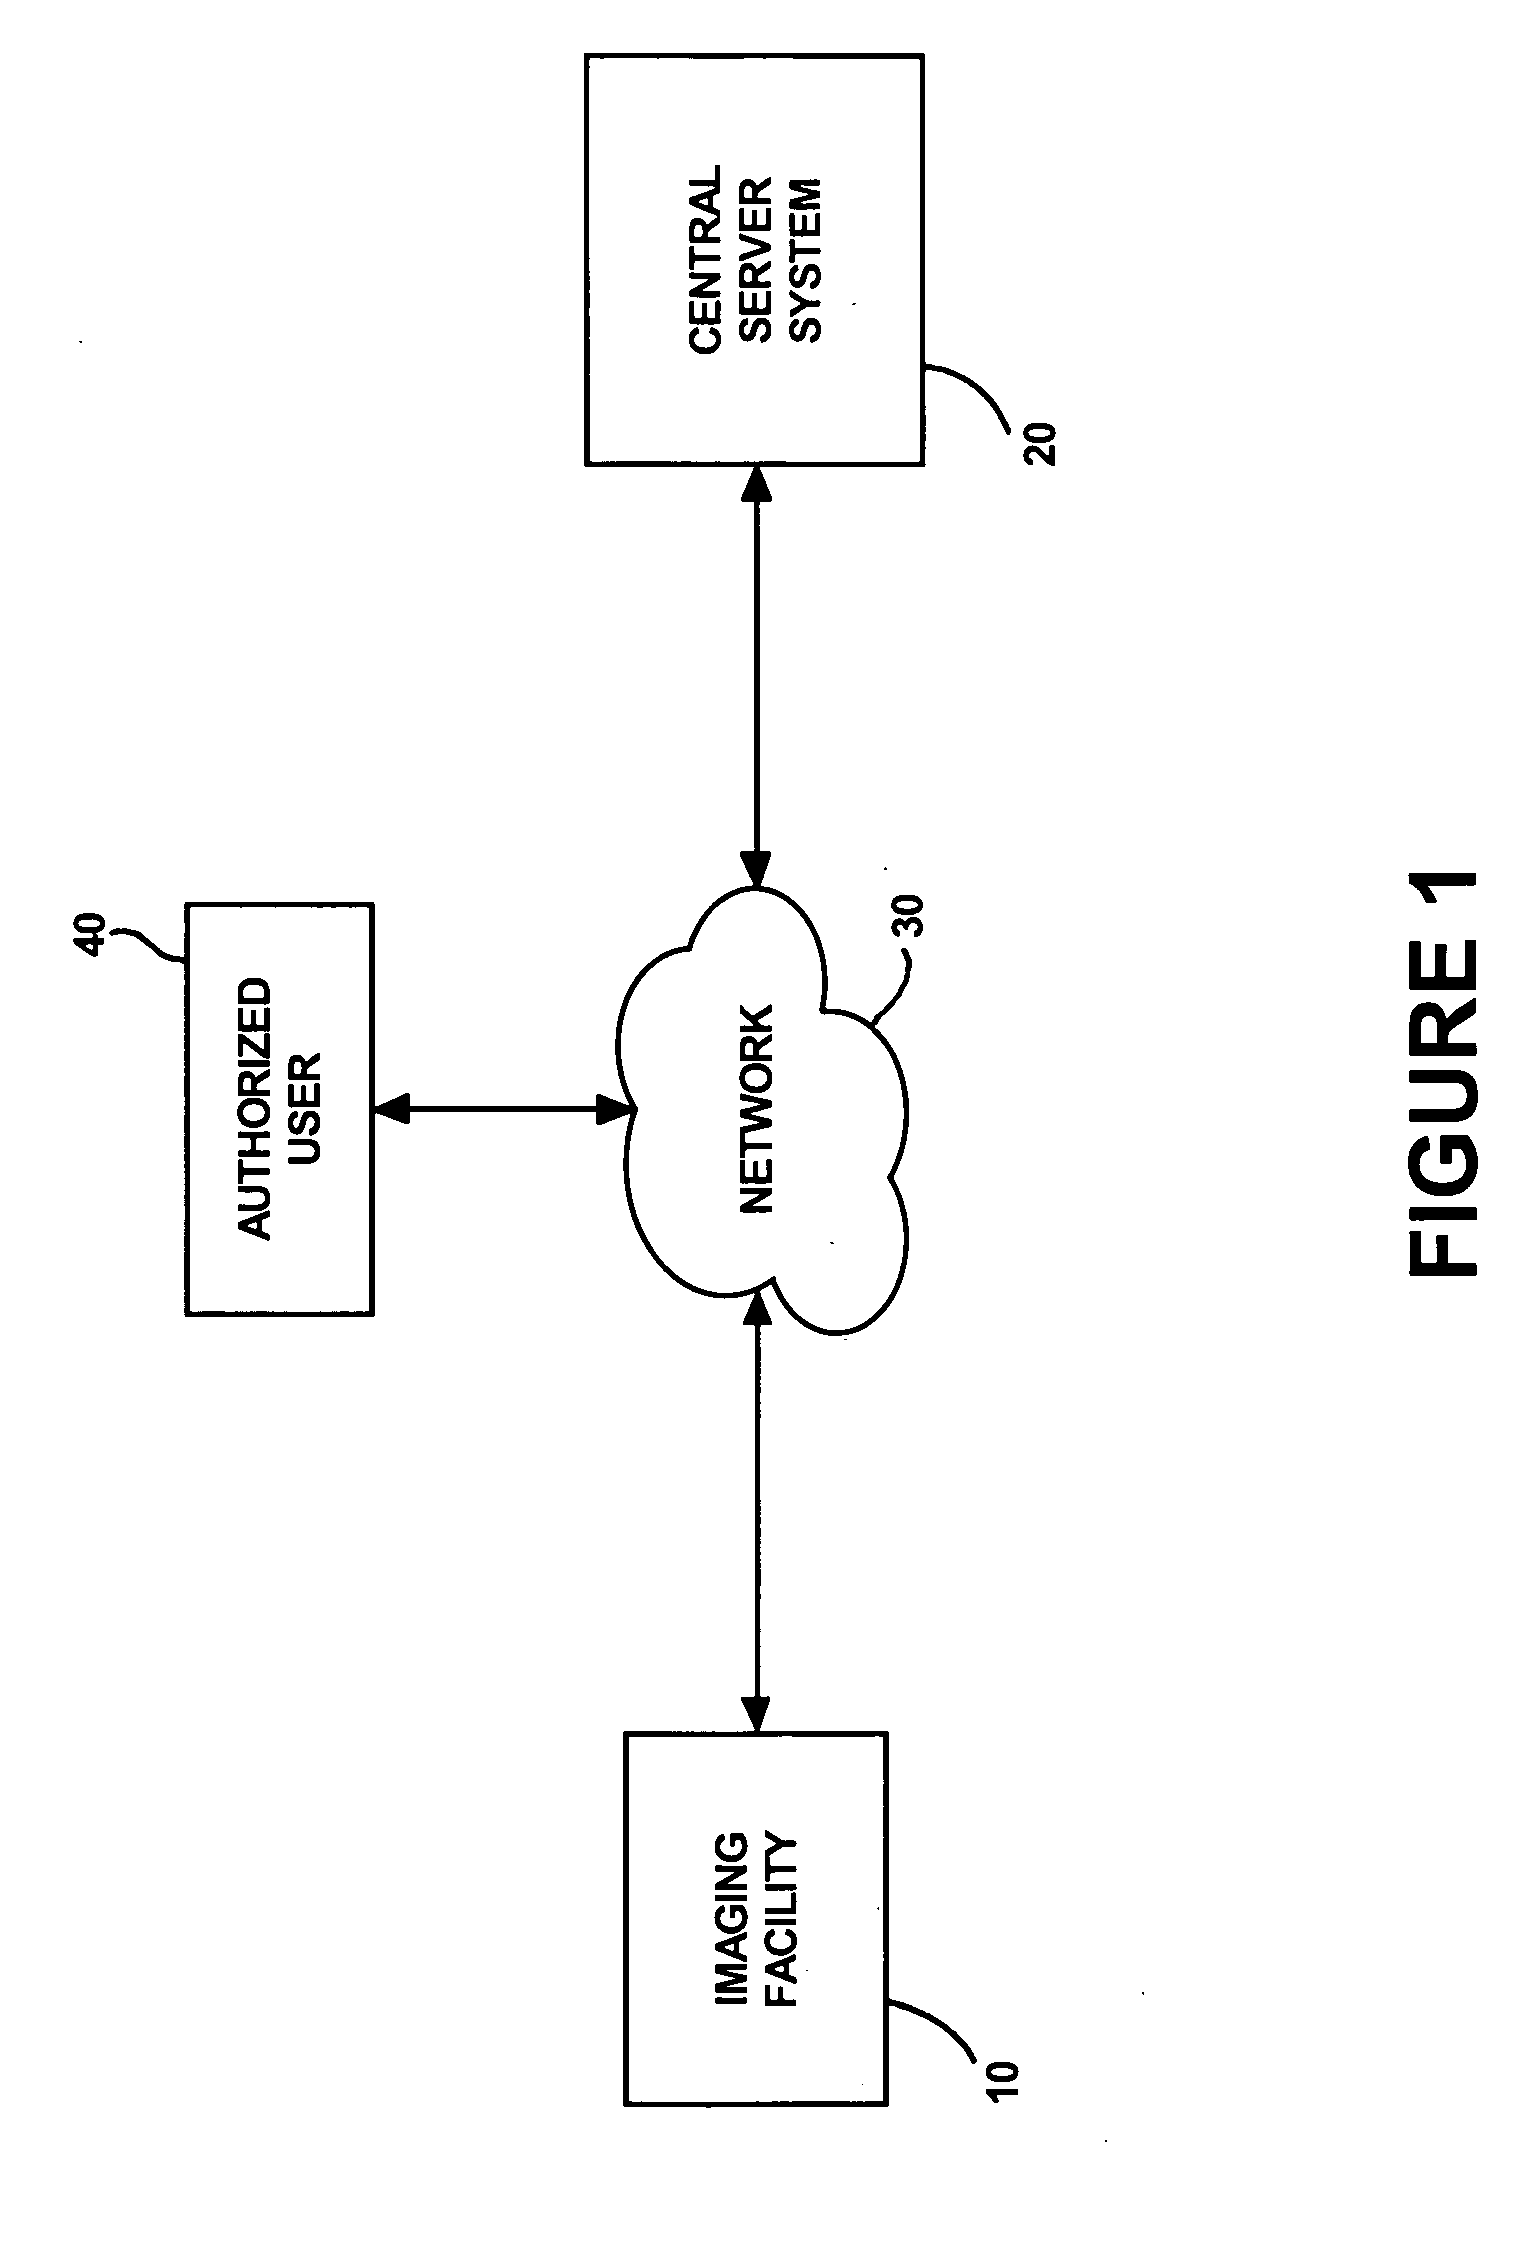 Method for payer access to medical image data